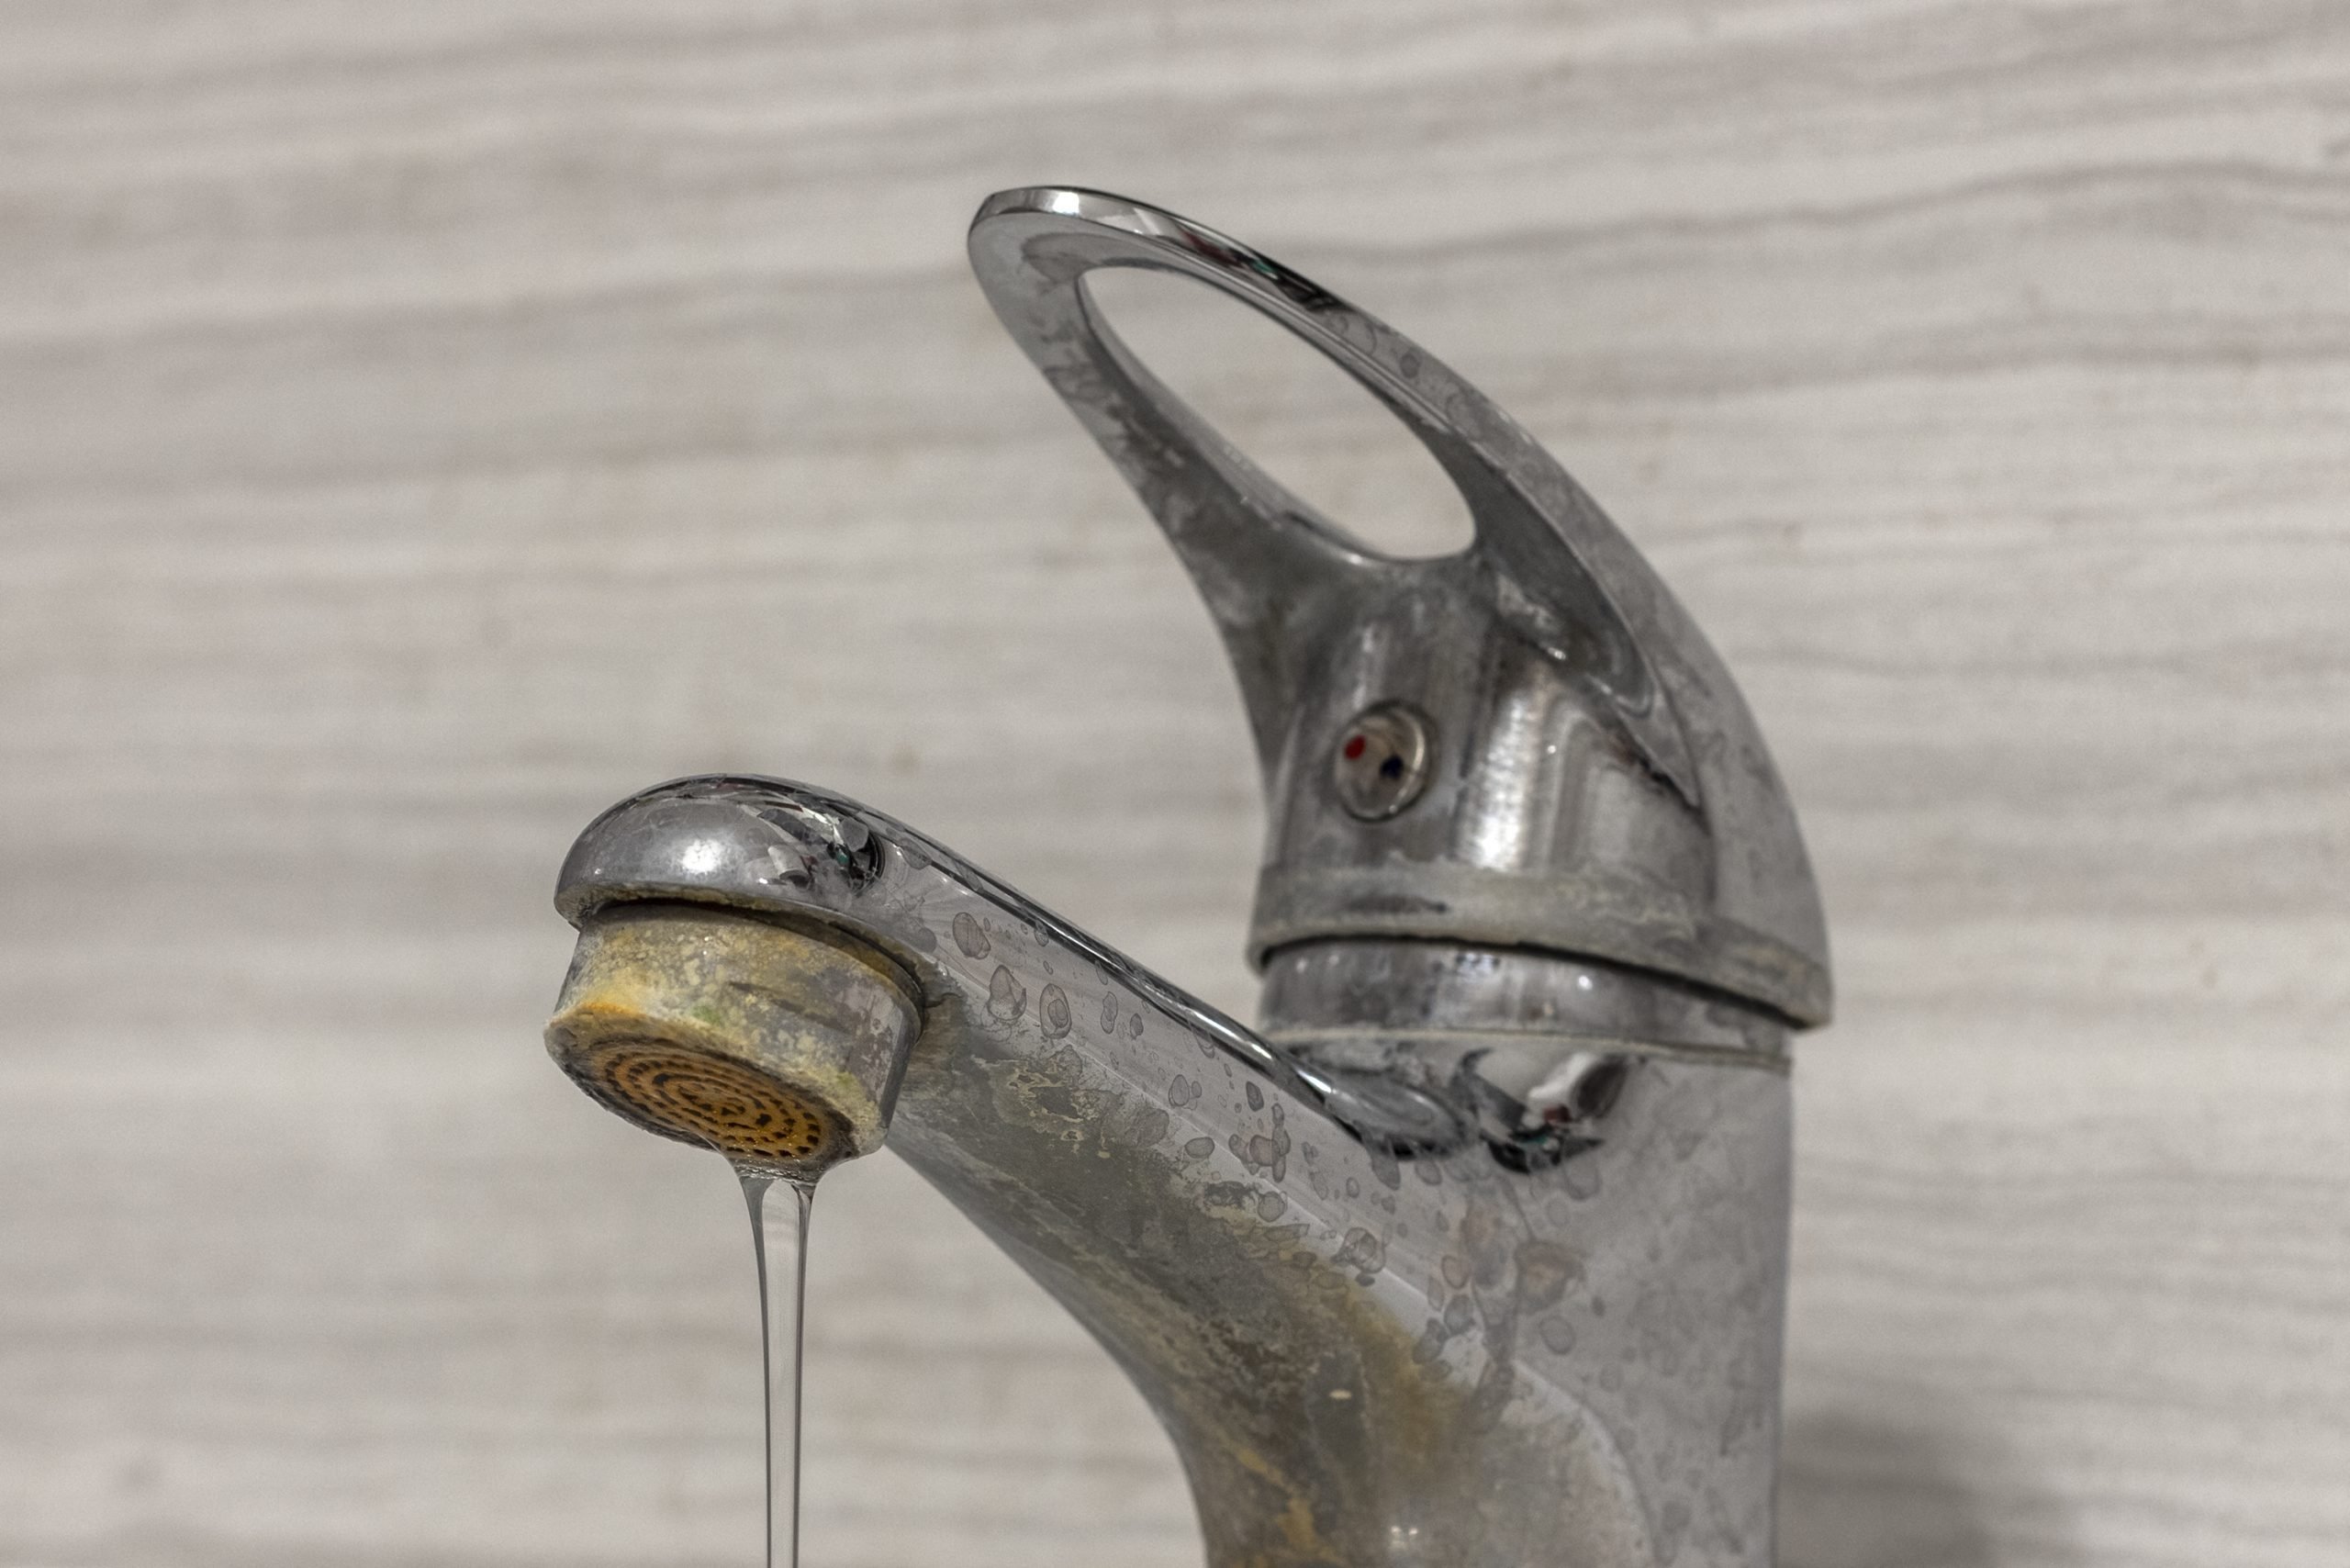 How To Remove Calcium From Faucet, Hard Water Stain Removal, Easy